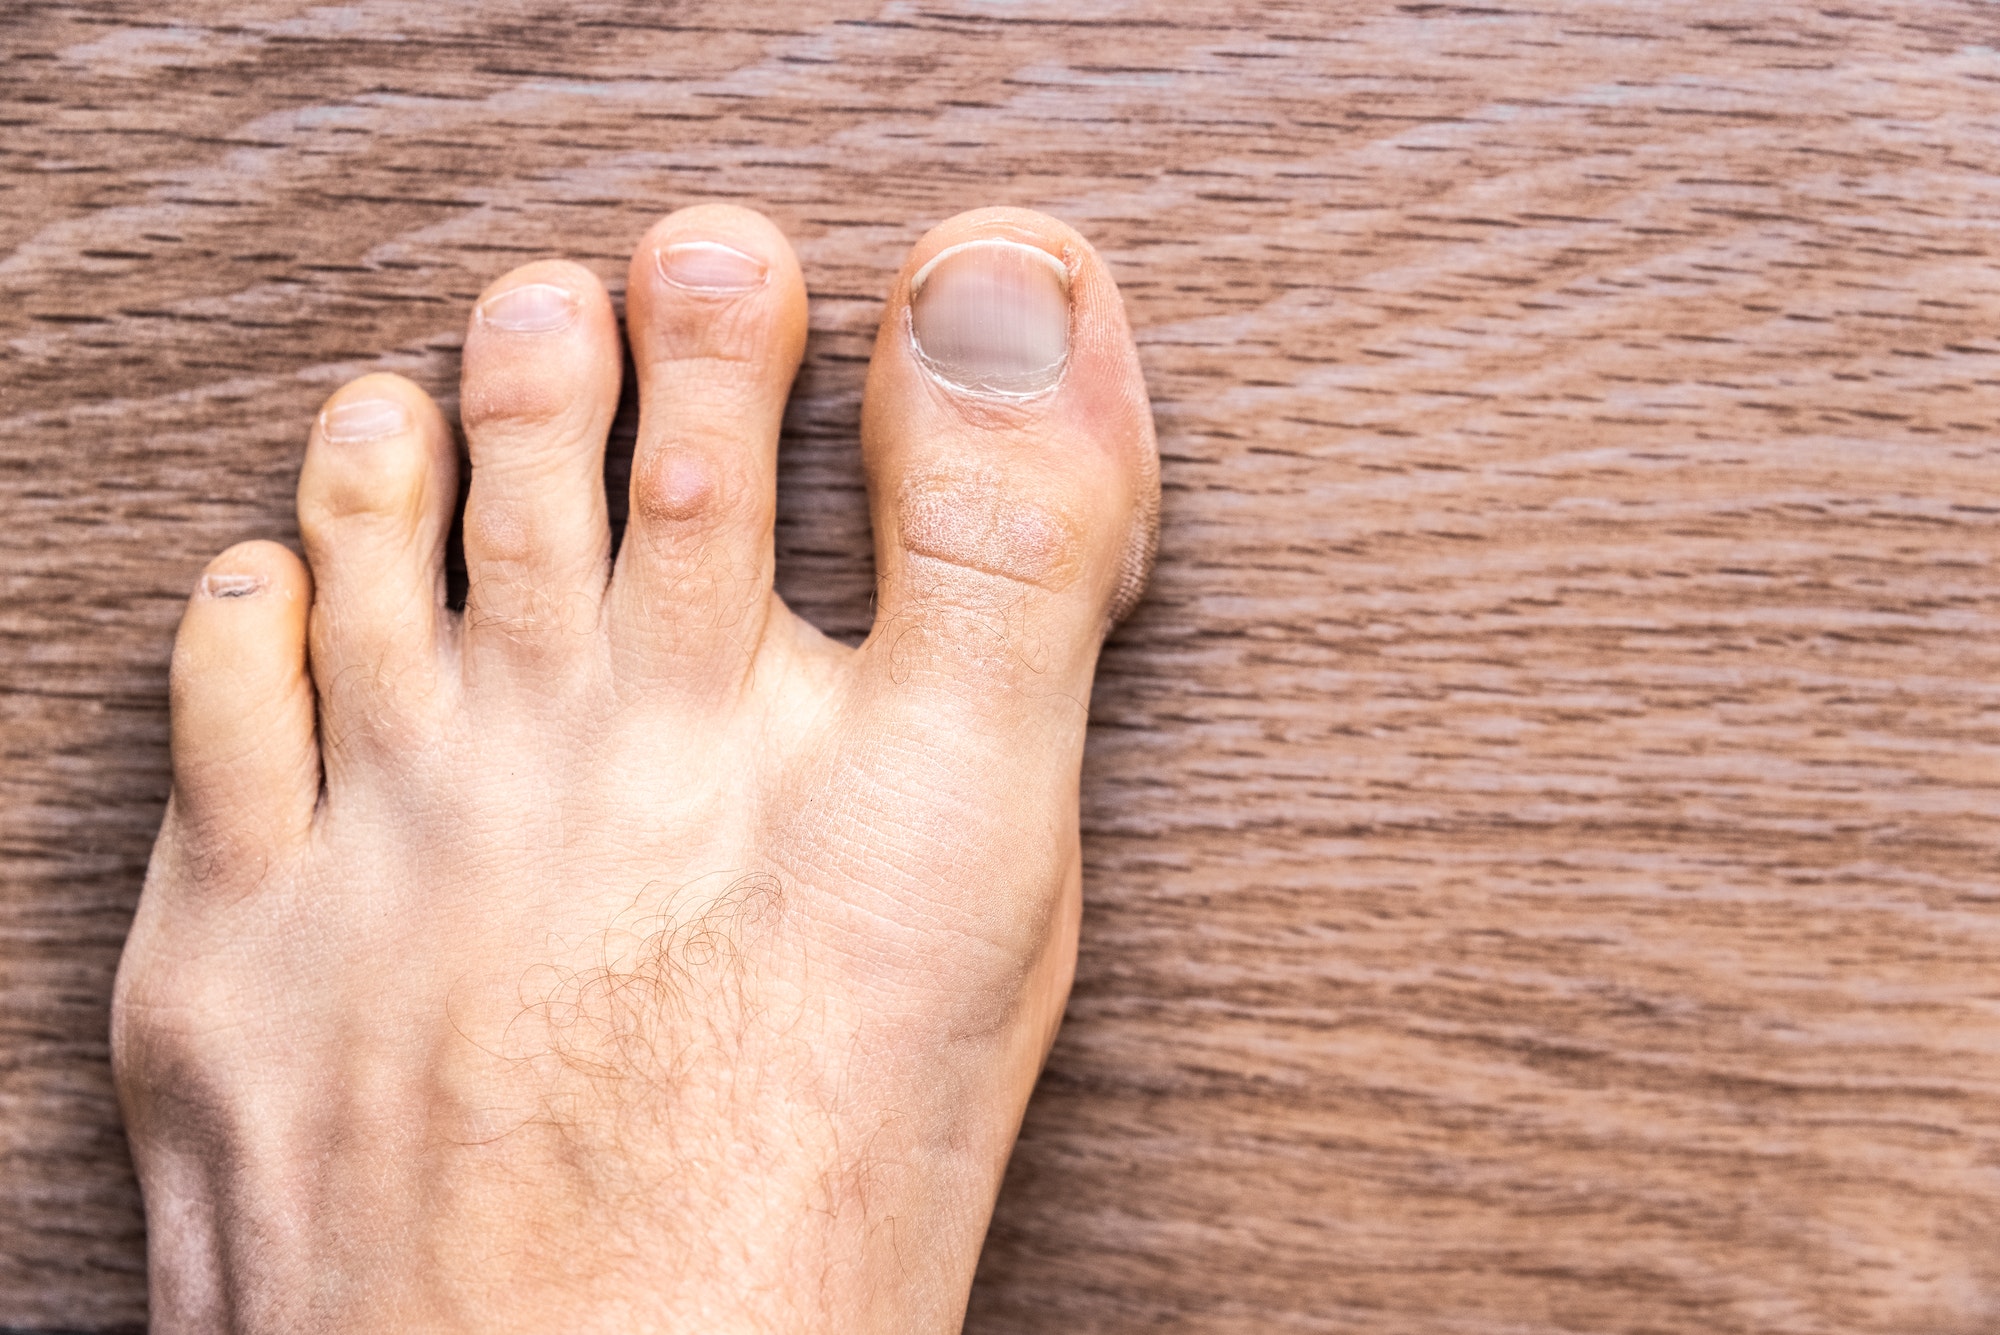 Toes affected by dermal problems, red rash produced plaques of psoriasis.